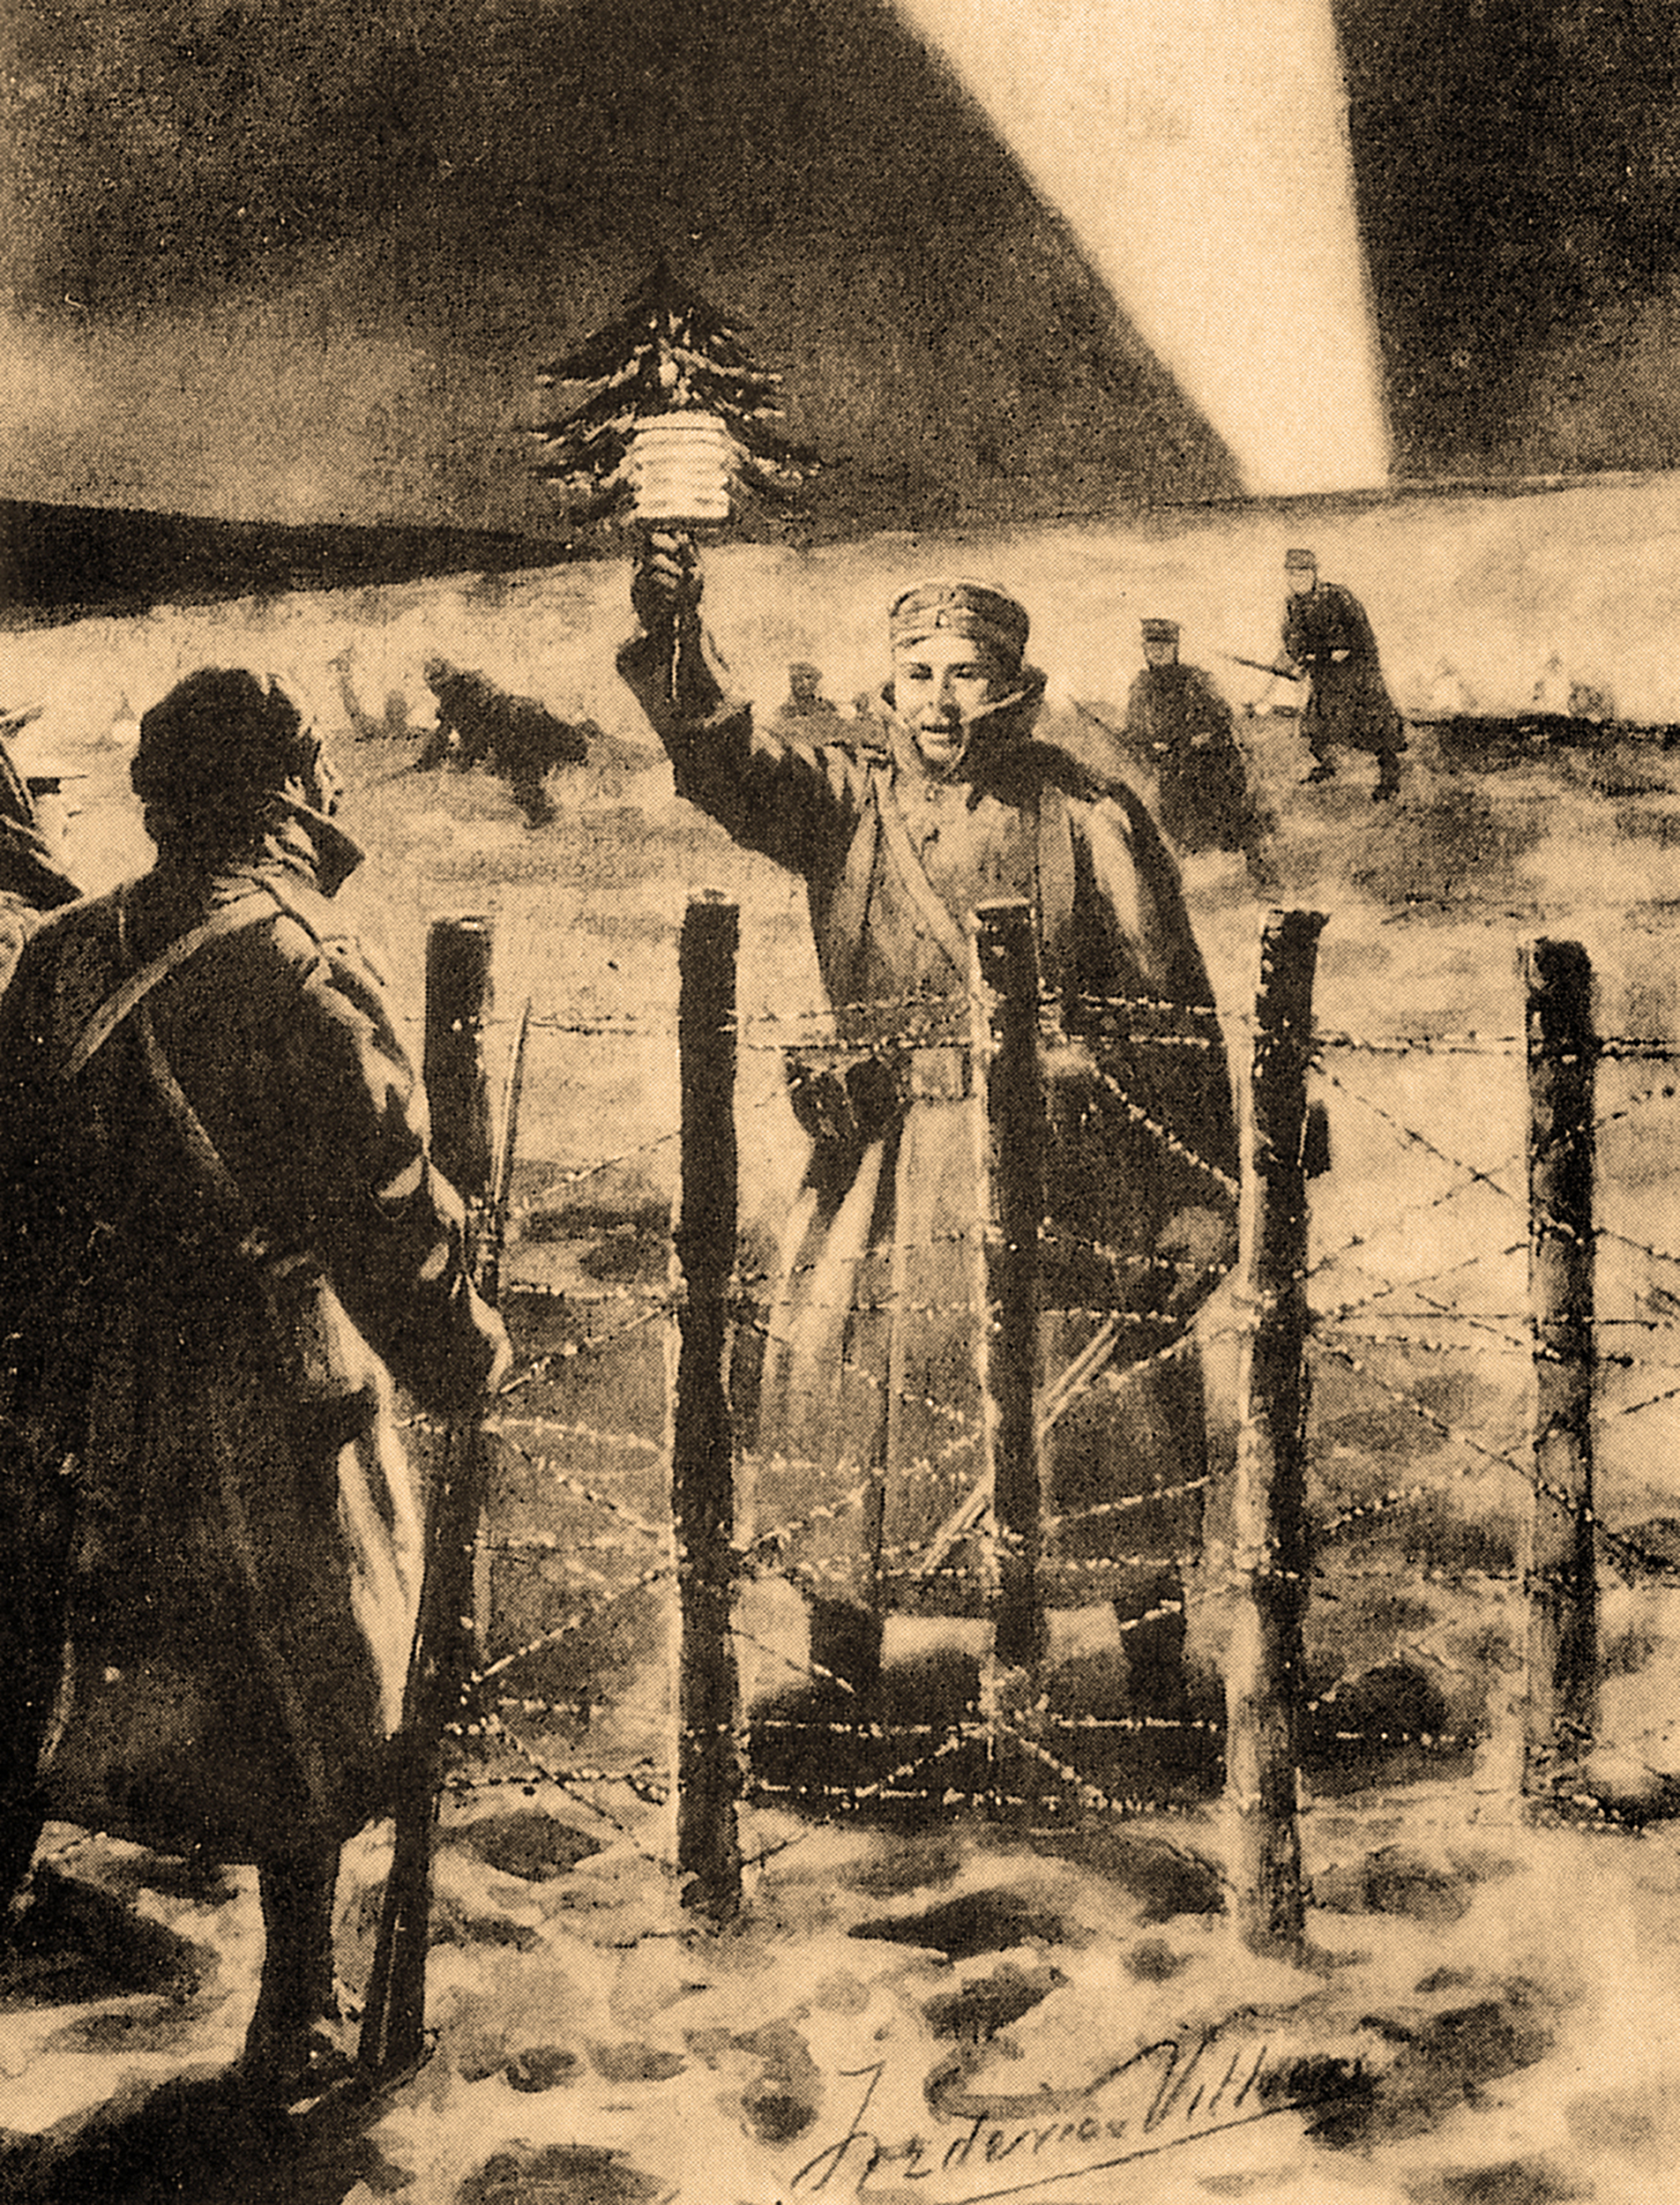 Illustration of the Christmas Truce